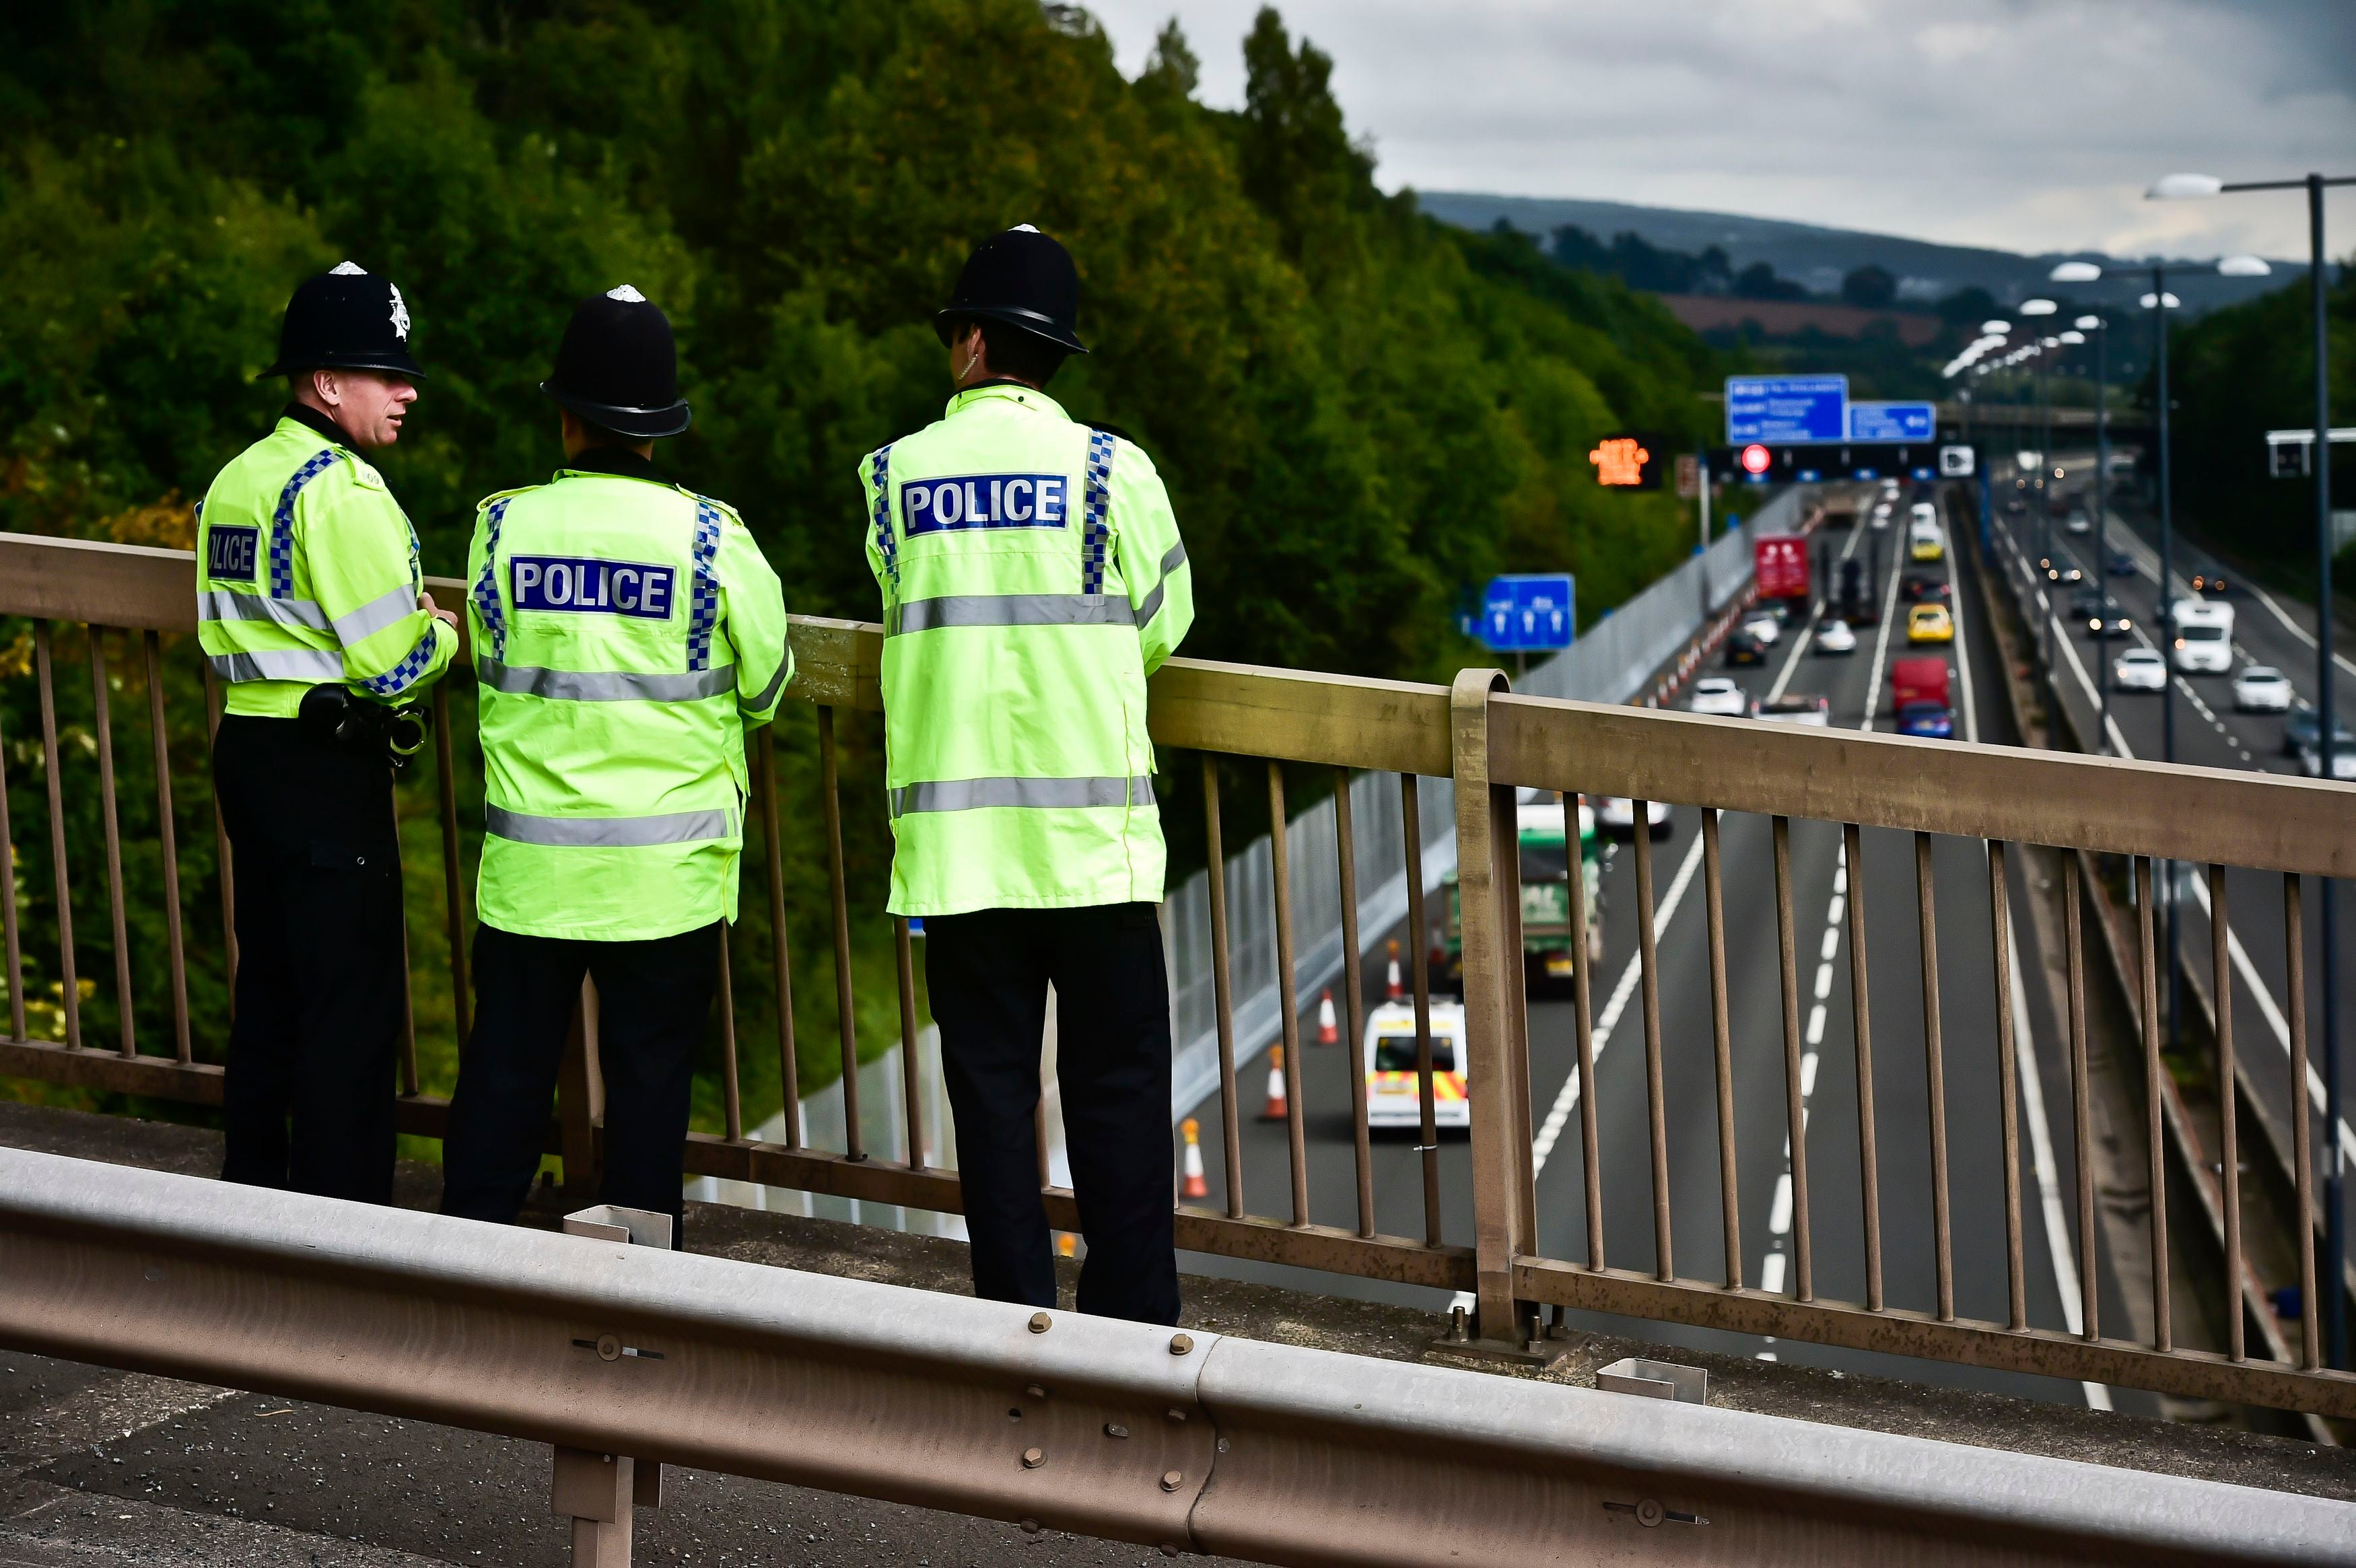 The crash took place on the M4 near Newport, South Wales last Saturday